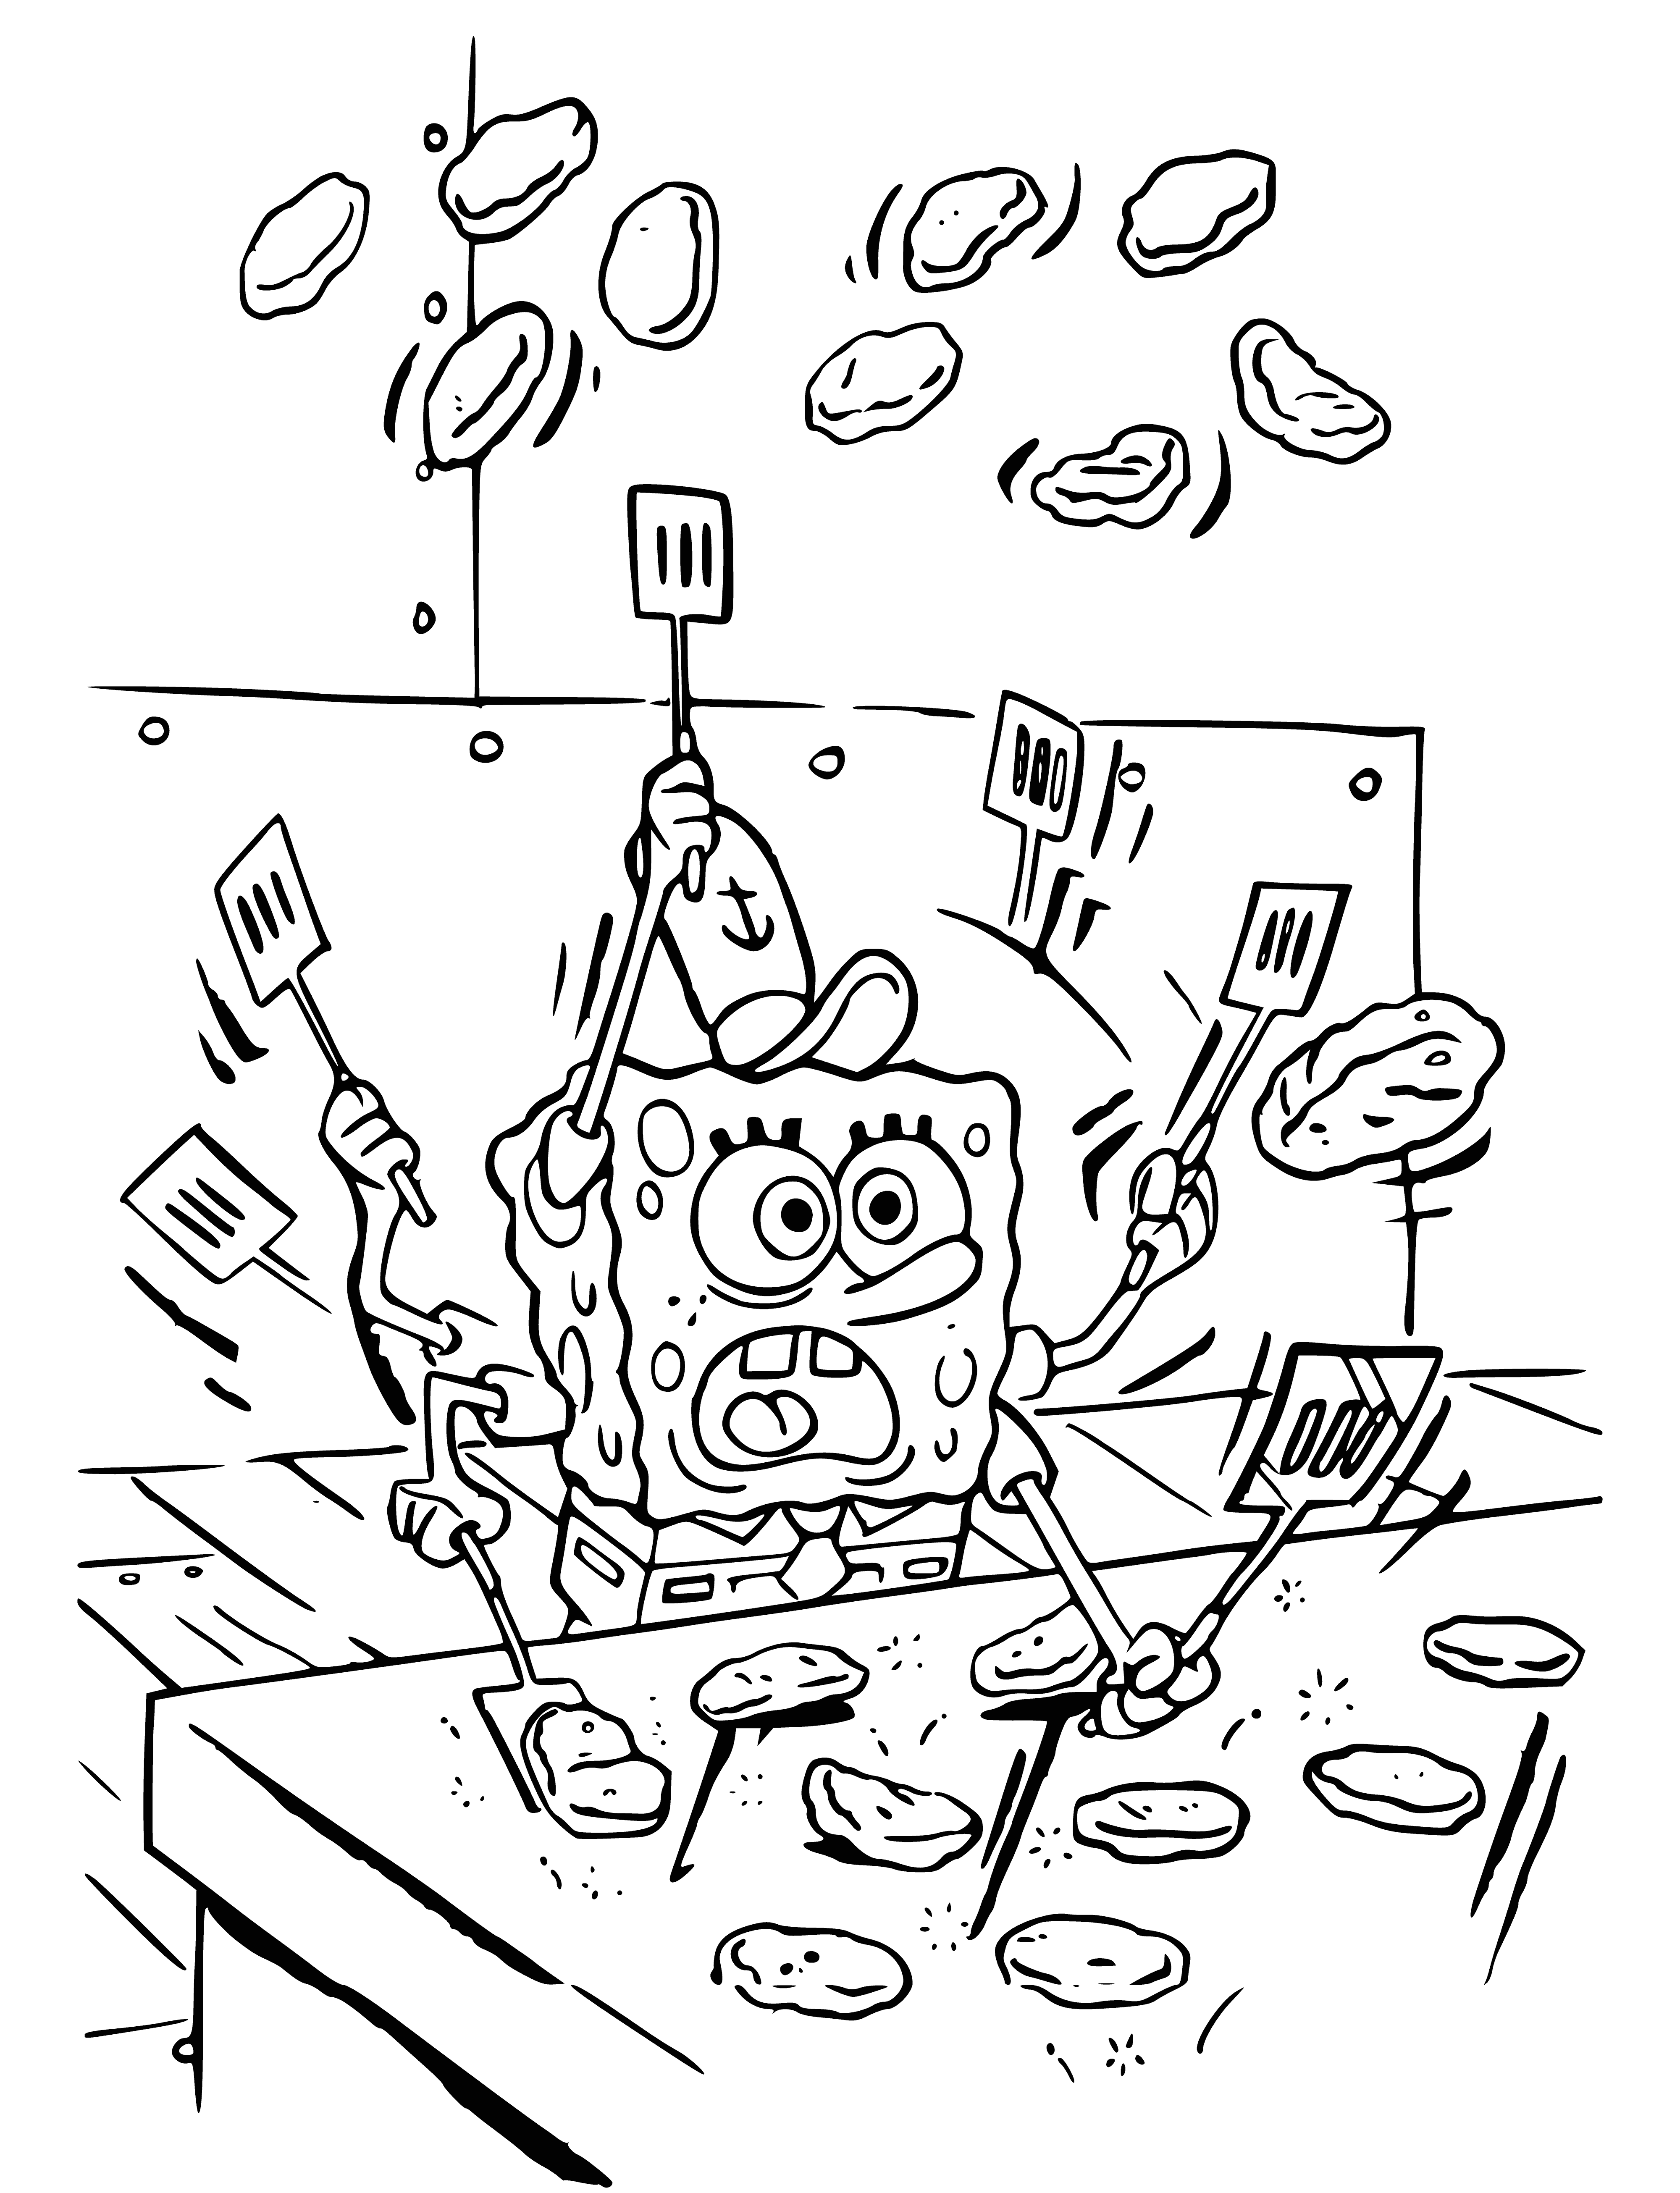 coloring page: SpongeBob stirs a pot at the stove with a spoon.